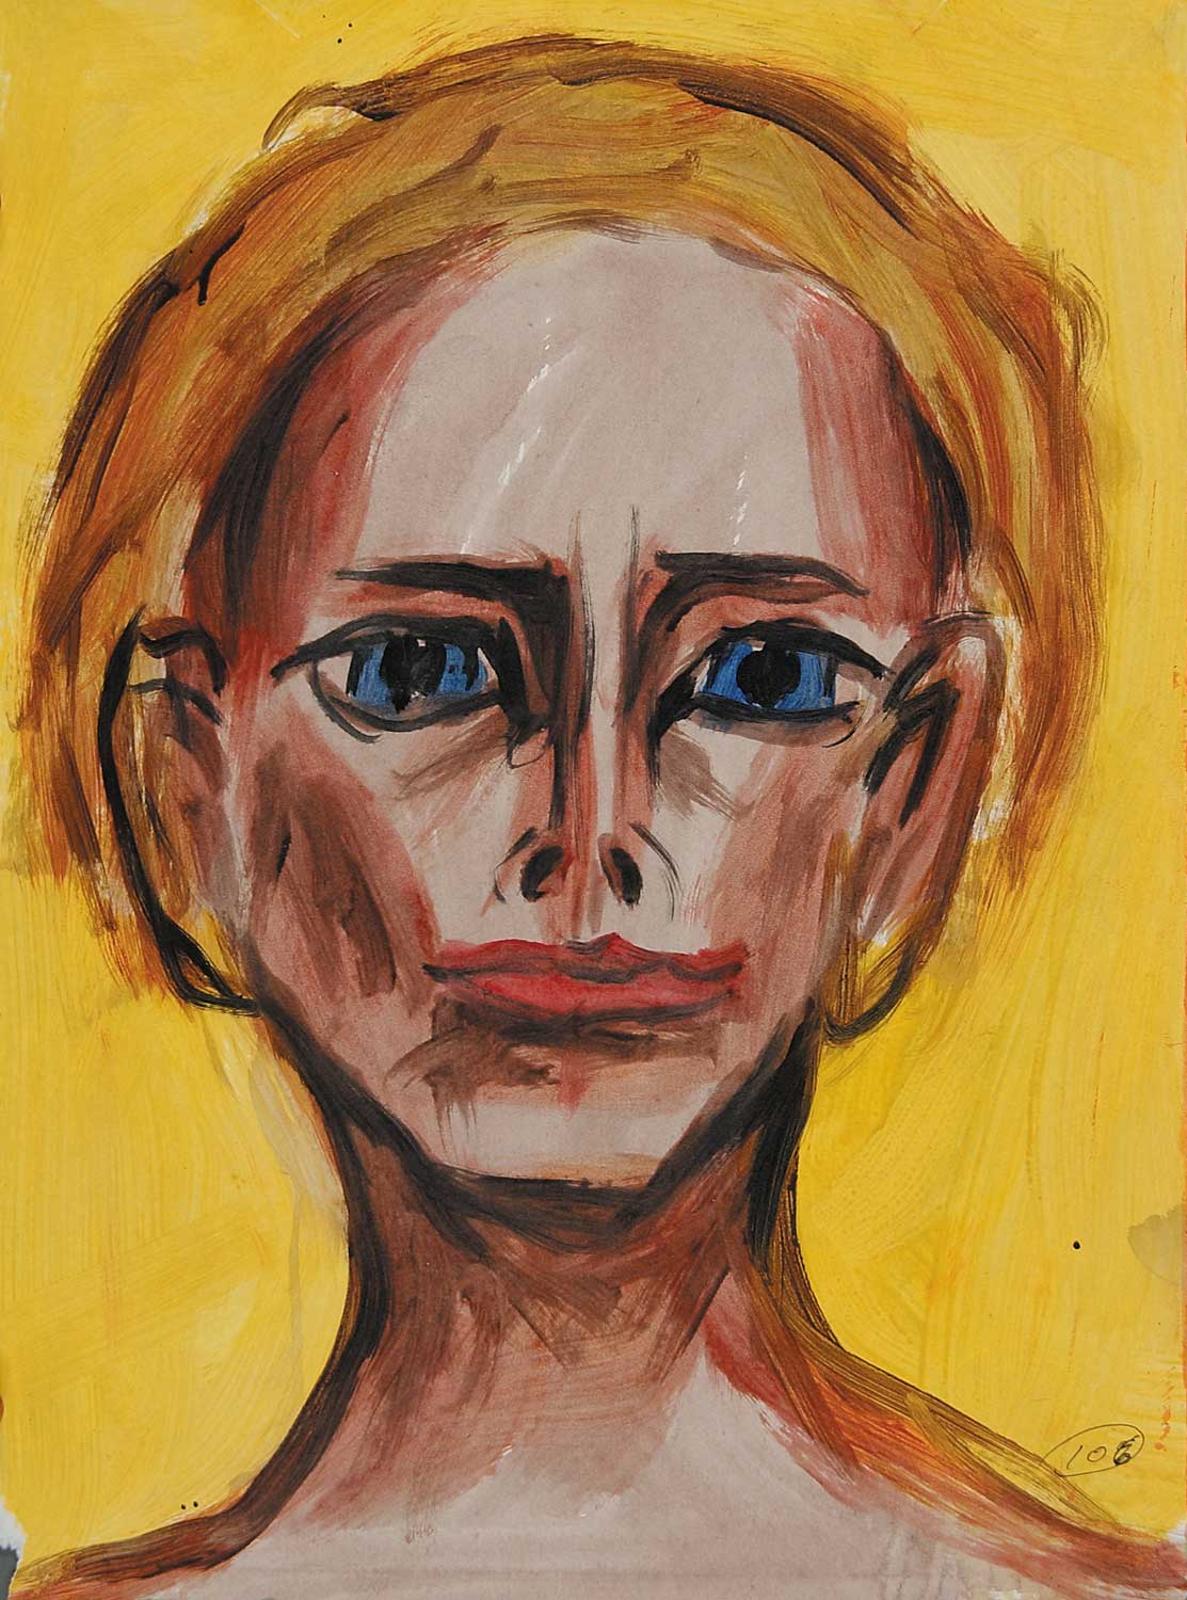 Robert Charles Aller (1922-2008) - Untitled - Woman with Blue Eyes, Red Lips on Yellow Background